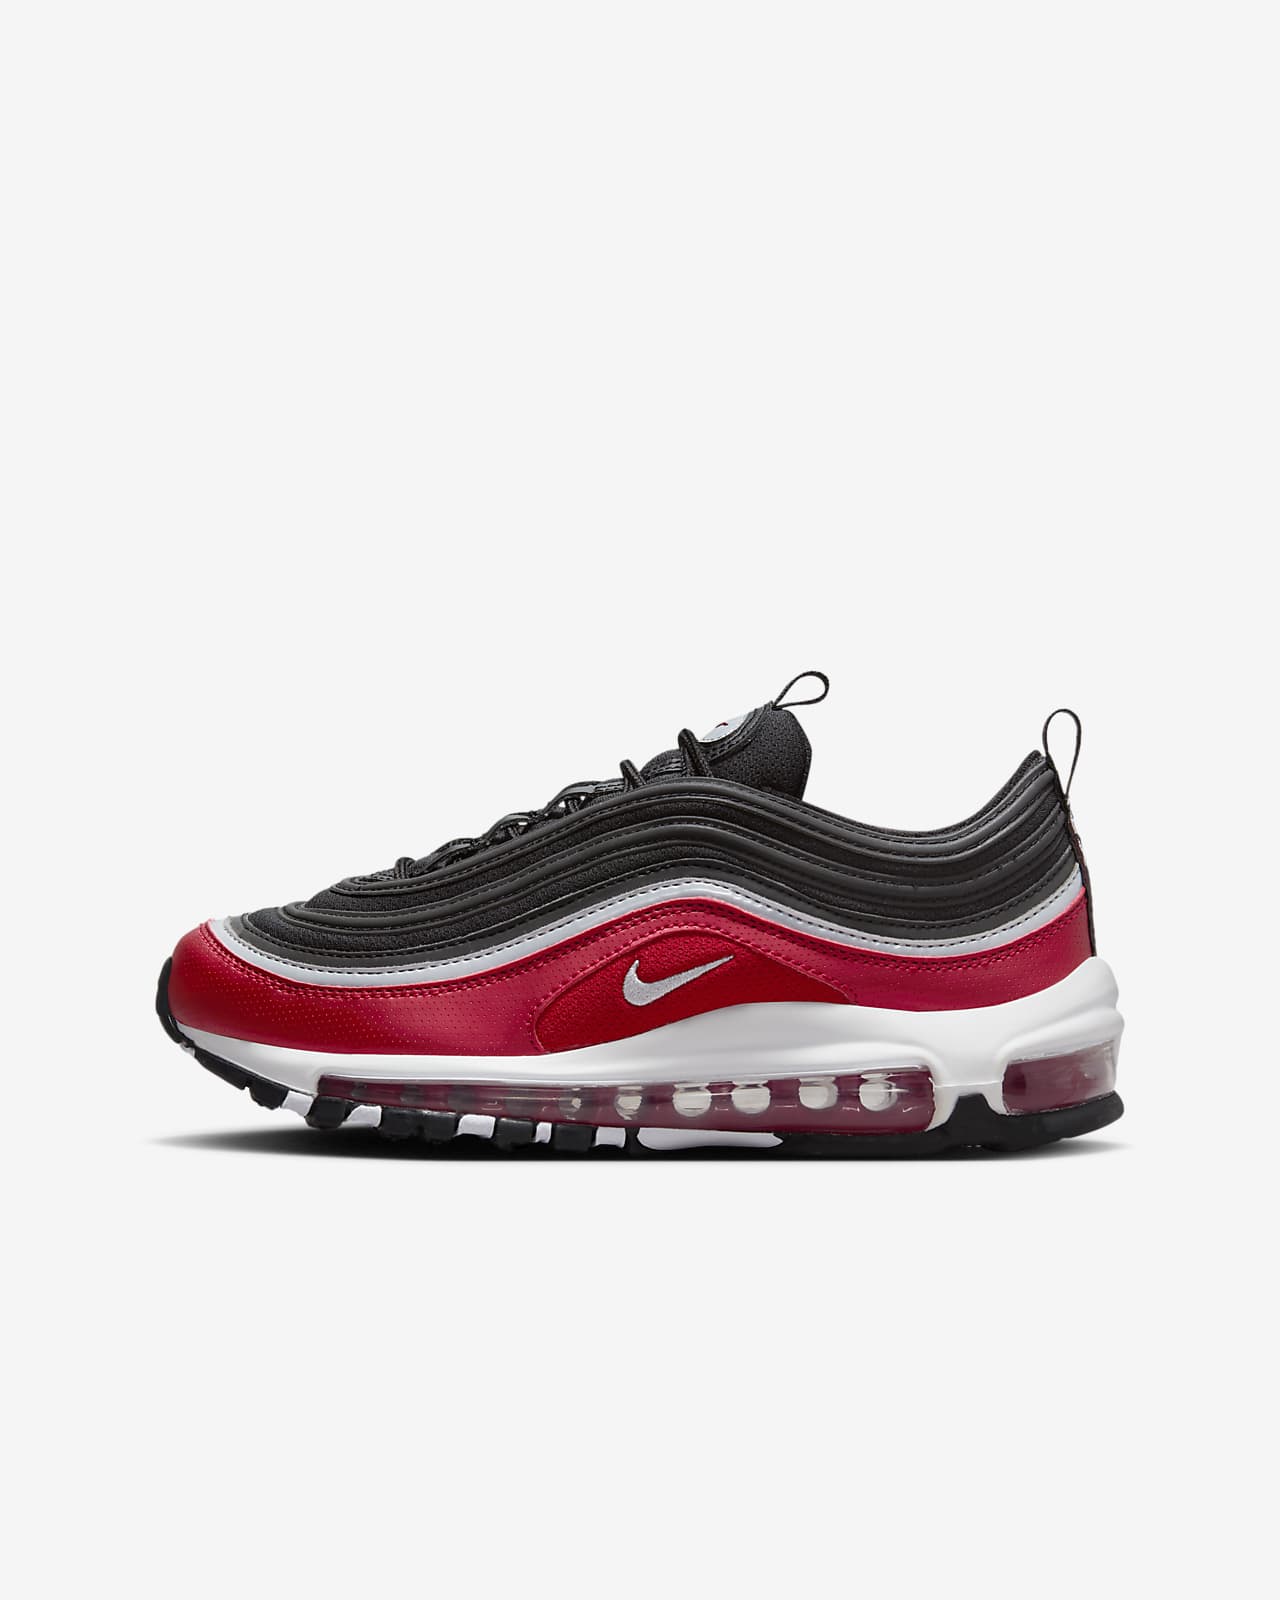 Nike Air Max 97 All Star Jersey White Blue Red Shoe Men's